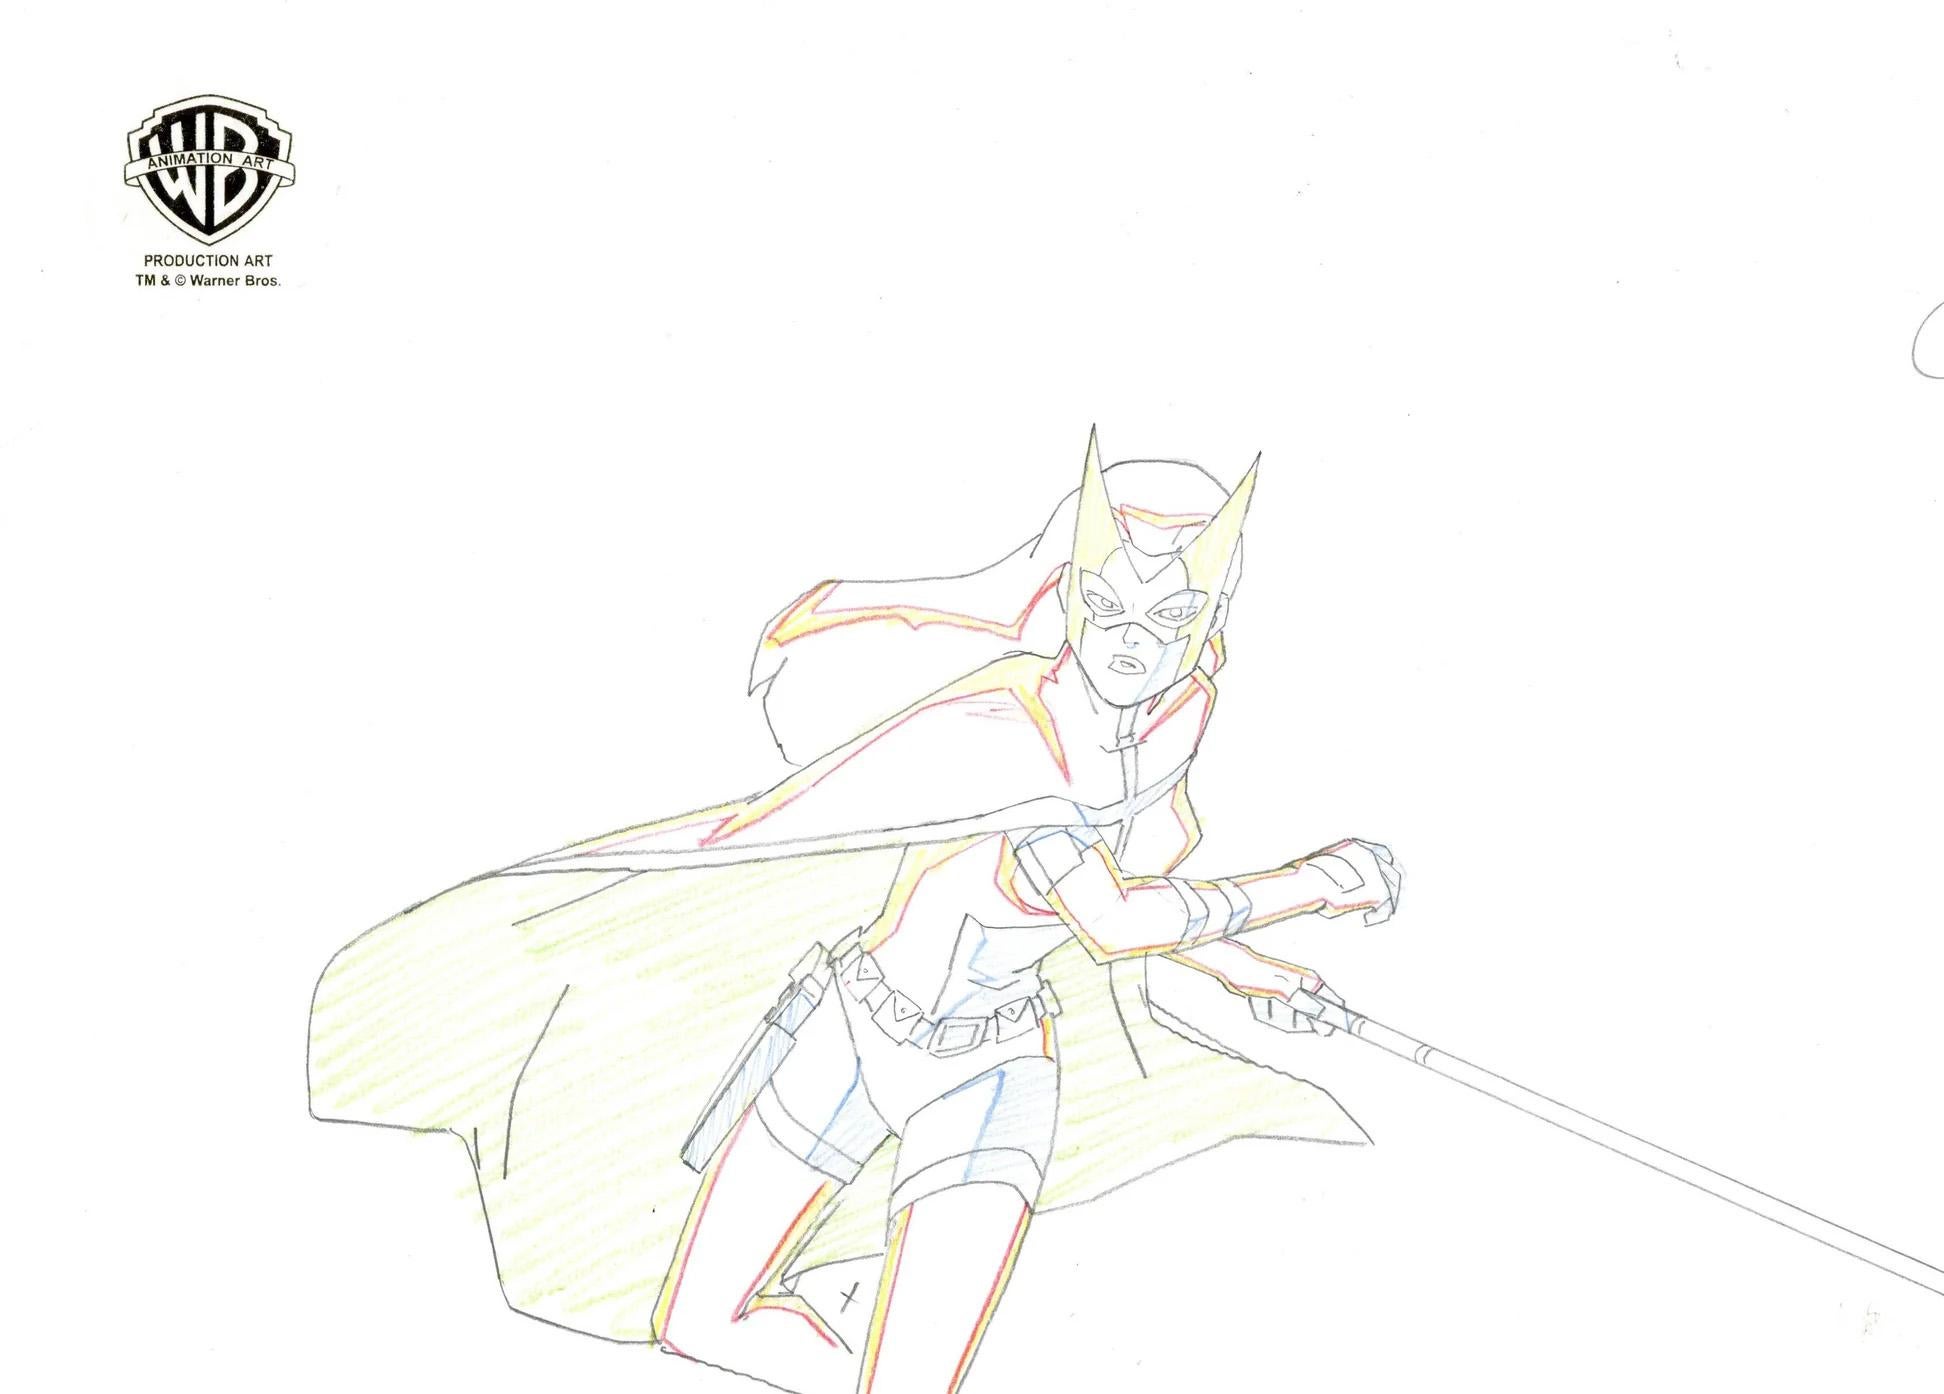 Justice League Unlimited Original Production Drawing: Huntress - Art by Warner Bros. Studio Artists